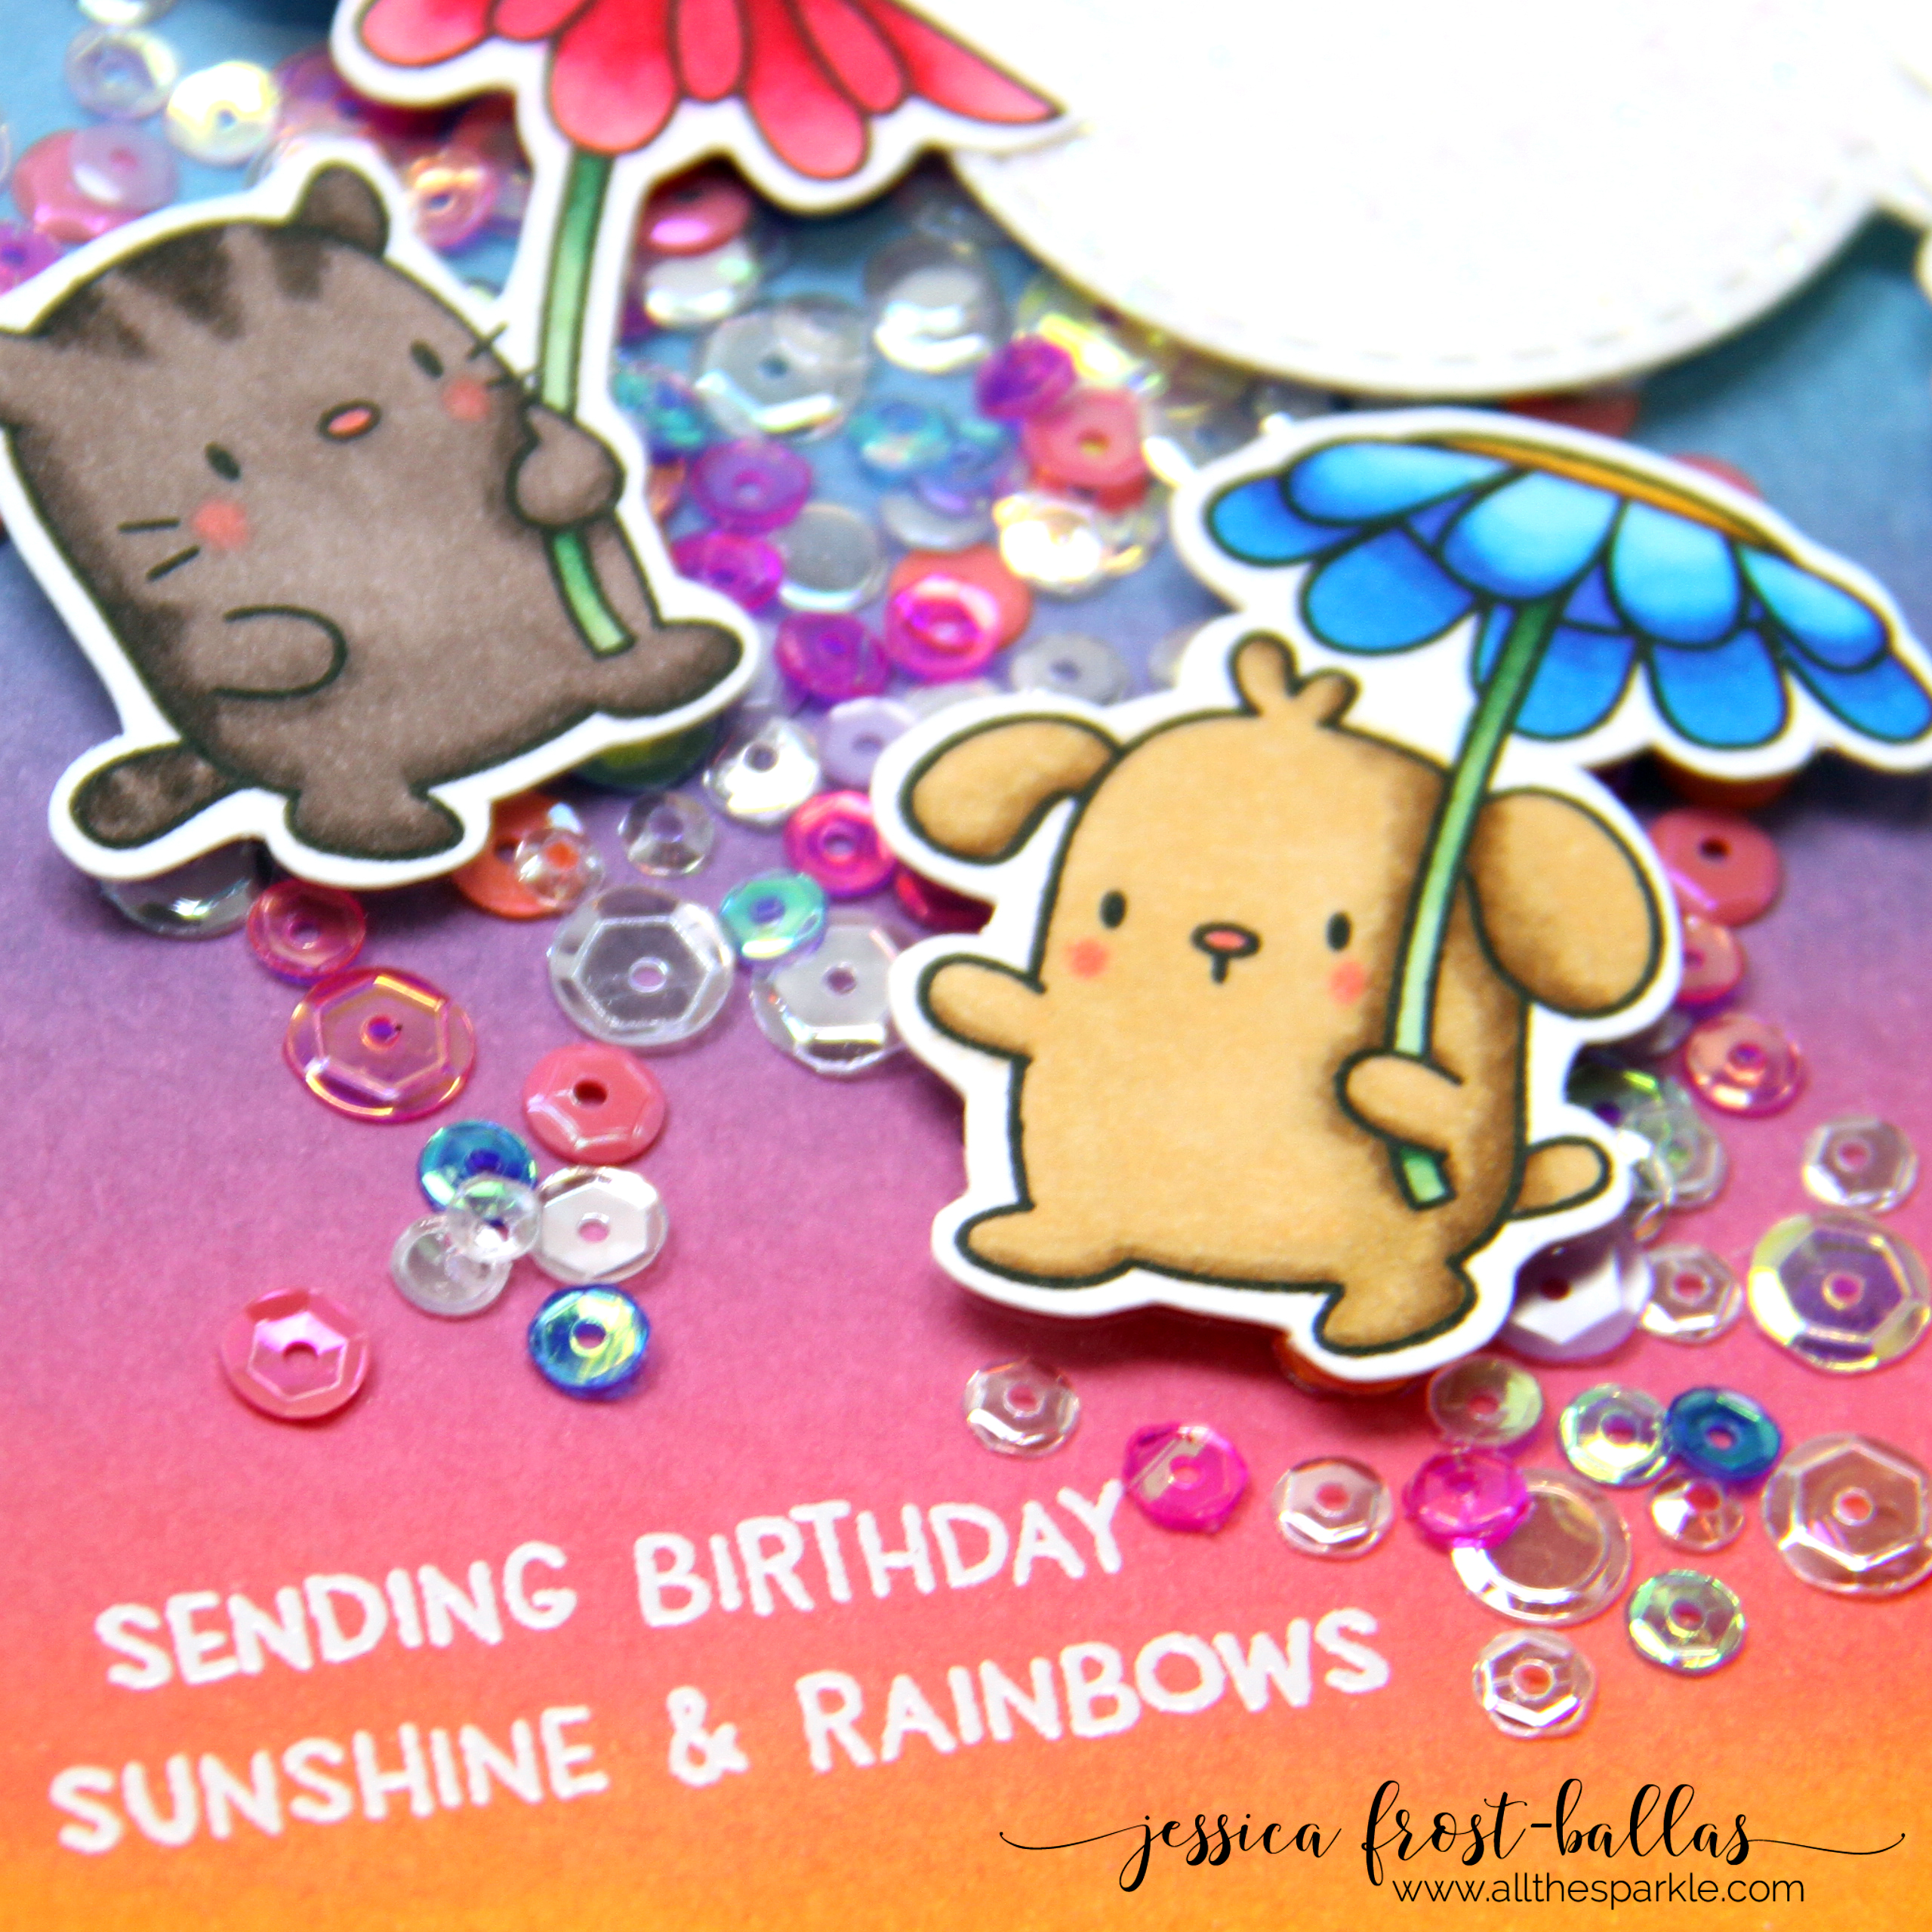 Sending Birthday Sunshine and Rainbows by Jessica Frost-Ballas for Simon Says Stamp